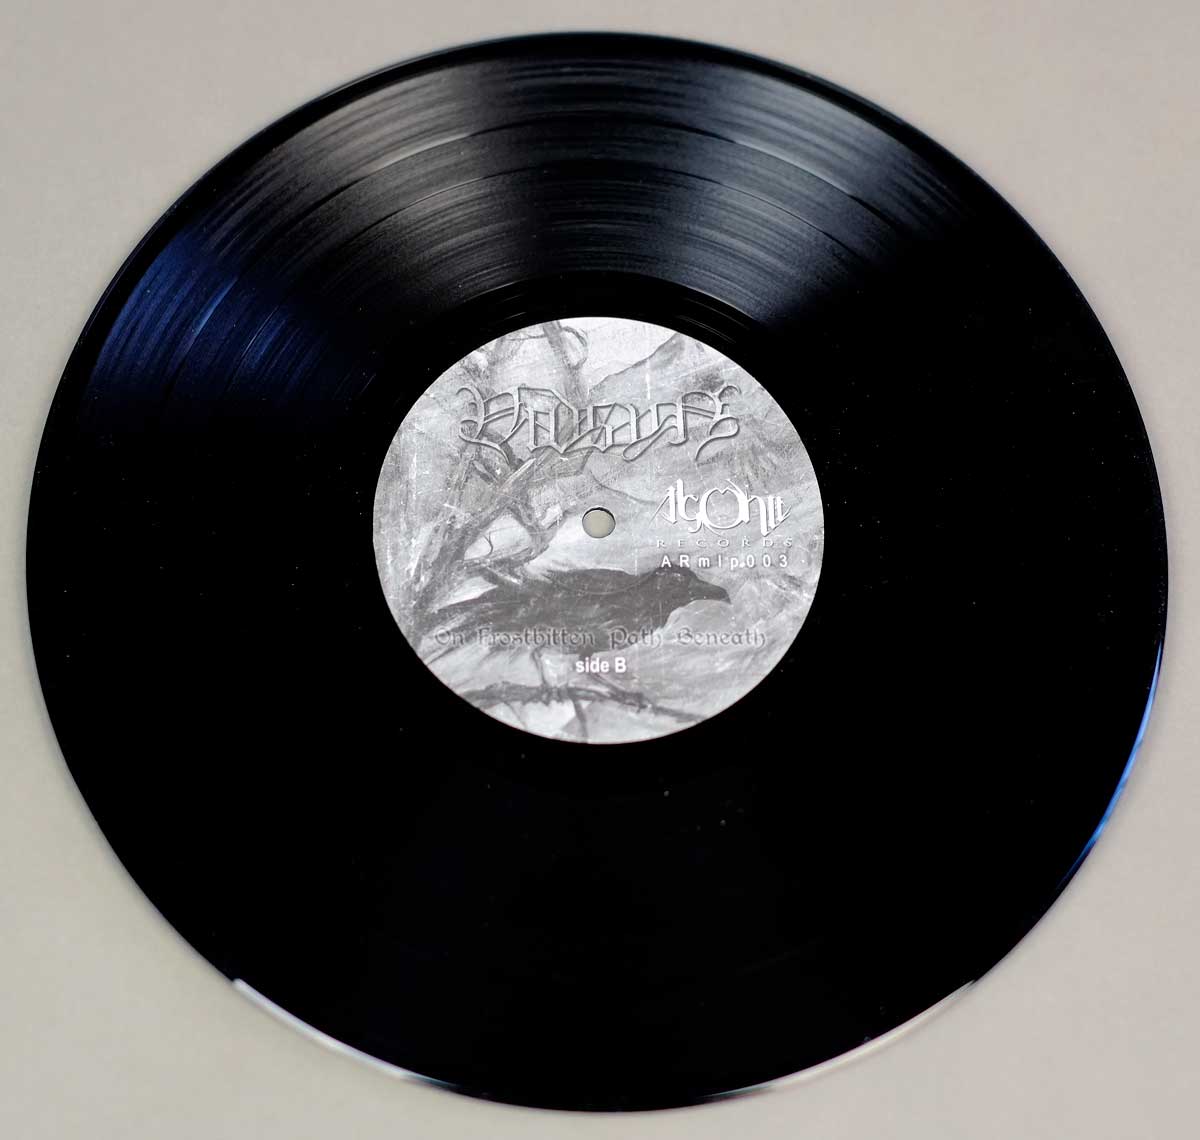 Photo of 12" LP Record Side Two VIDSYN	- On Frostbitten Path Beneath   Vinyl Record Gallery https://vinyl-records.nl//